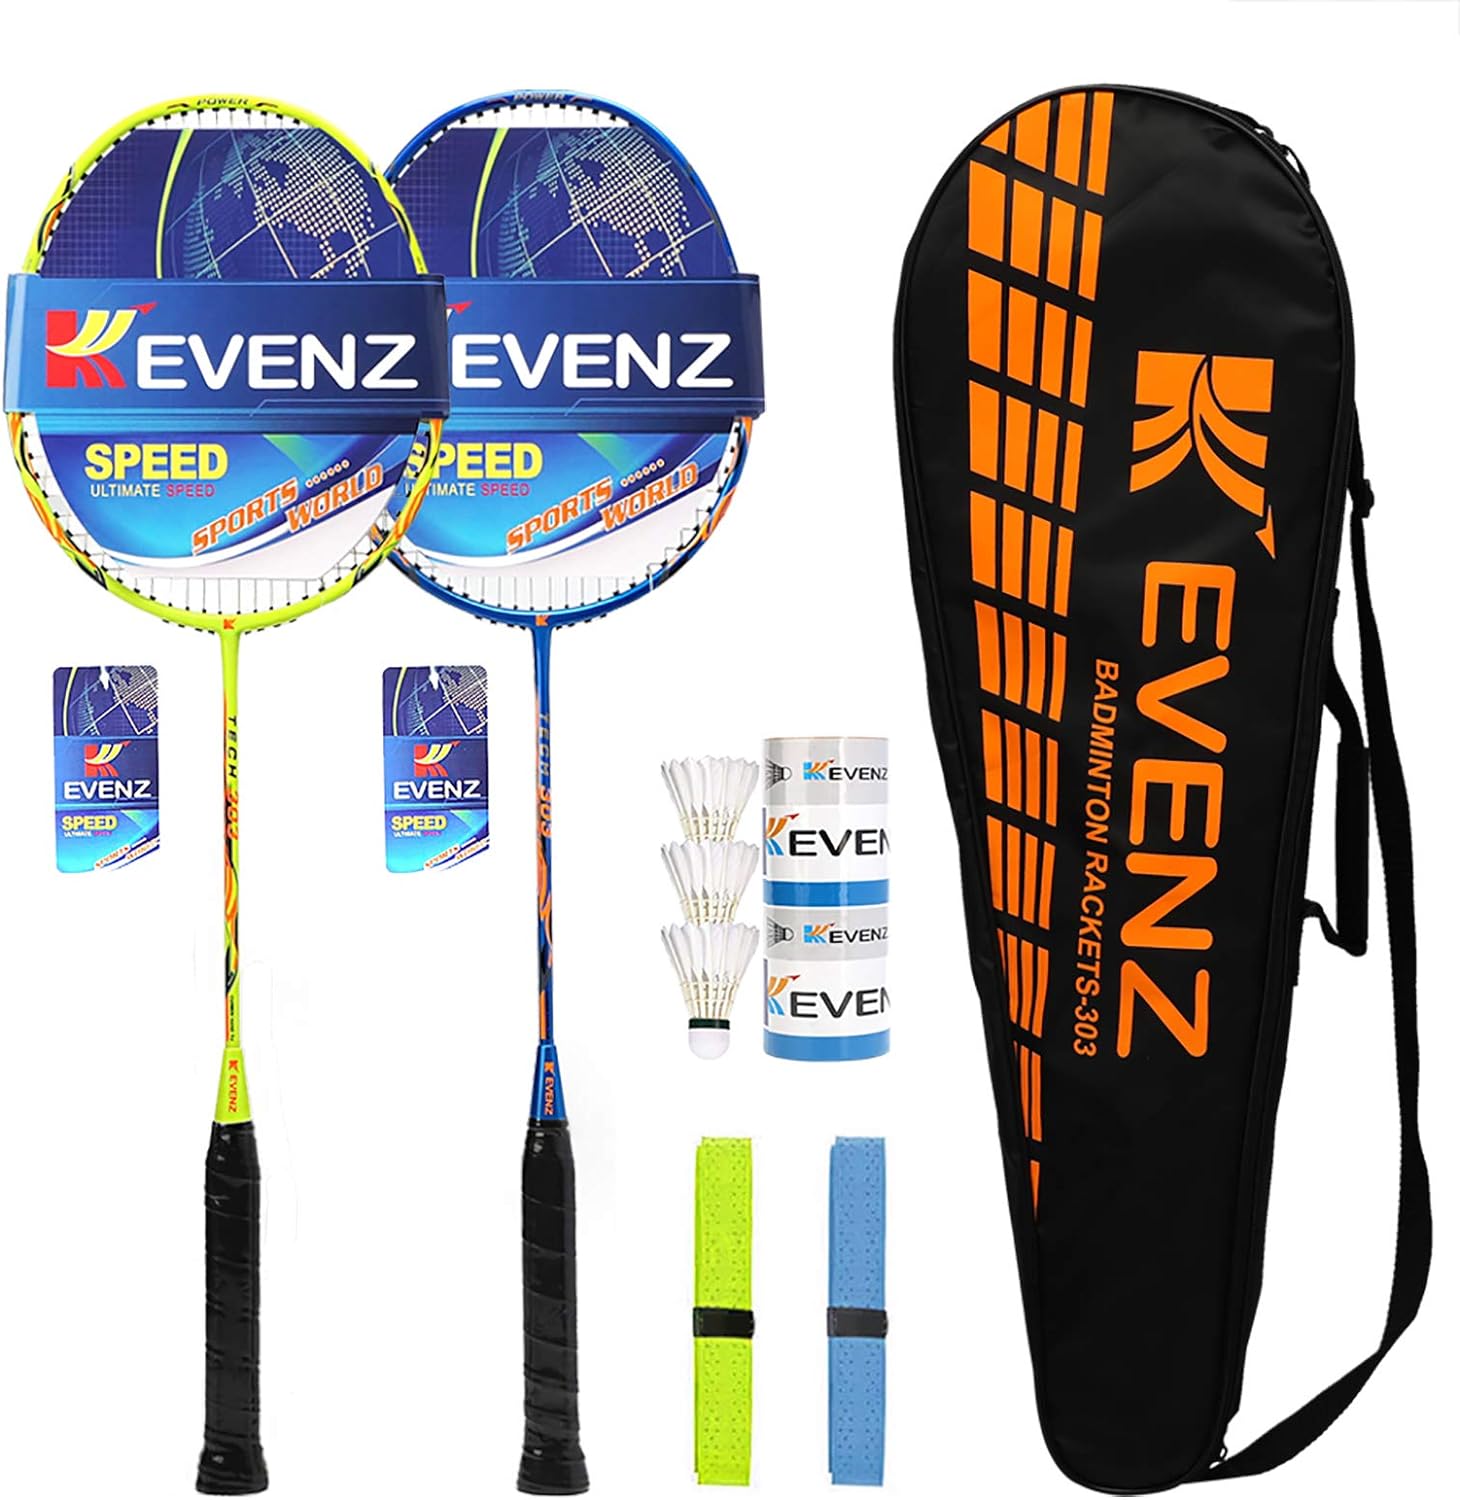 We really liked these rackets! They are very light-weight, super high quality and easy to handle. We have been enjoying to play with them since the day they arrived. The birdies are also very nice. We highly recommend these to anyone who enjoys to play badminton.